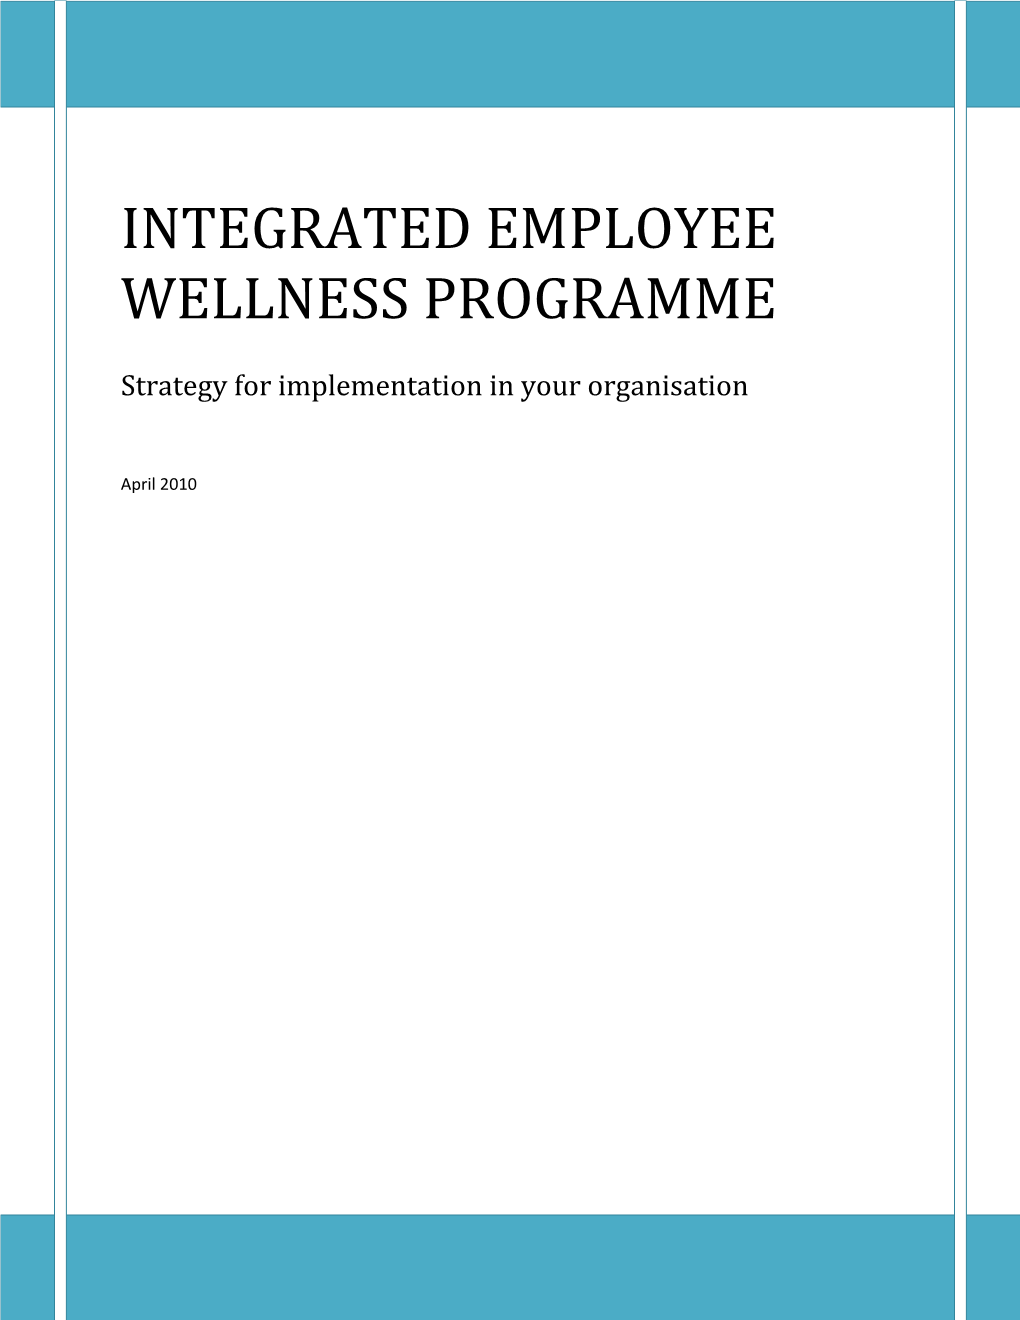 Strategy For Implementation: Integrated Employee Wellness Programme